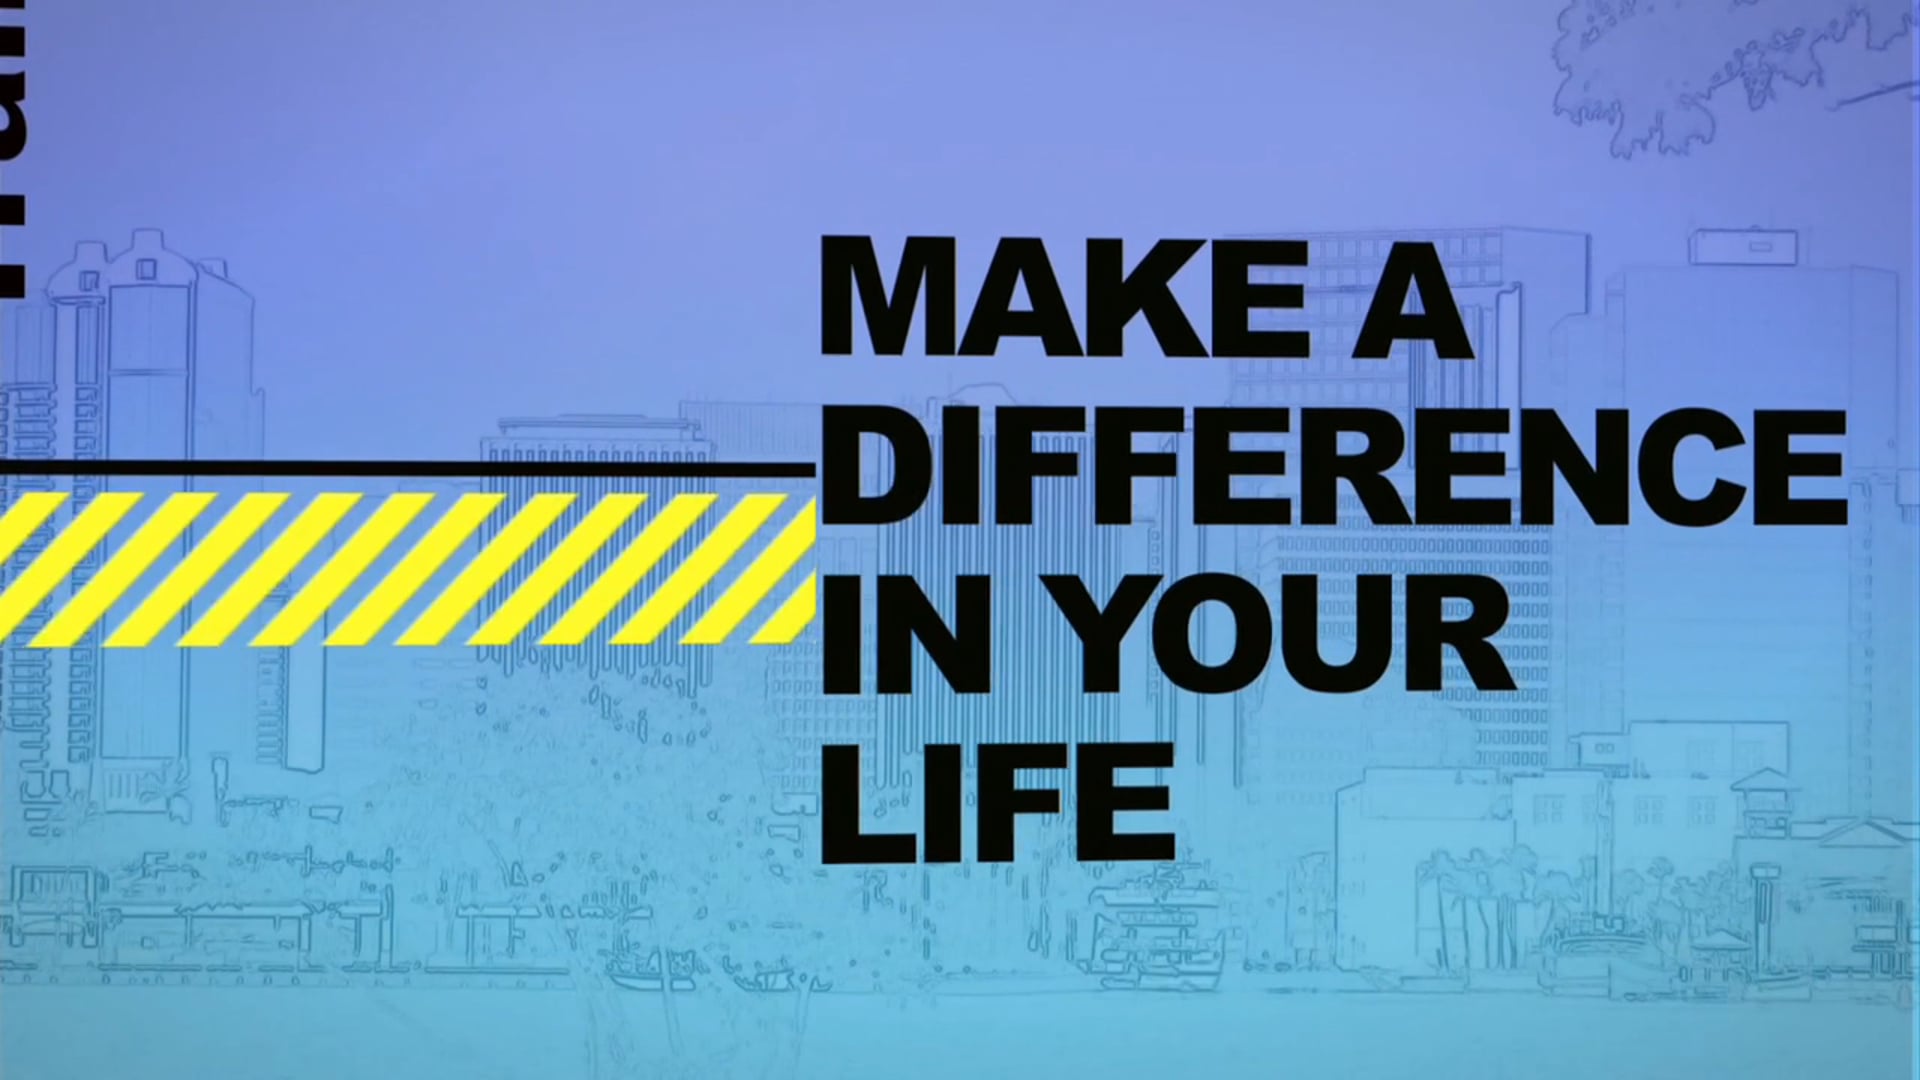 Make a Difference in Your Life